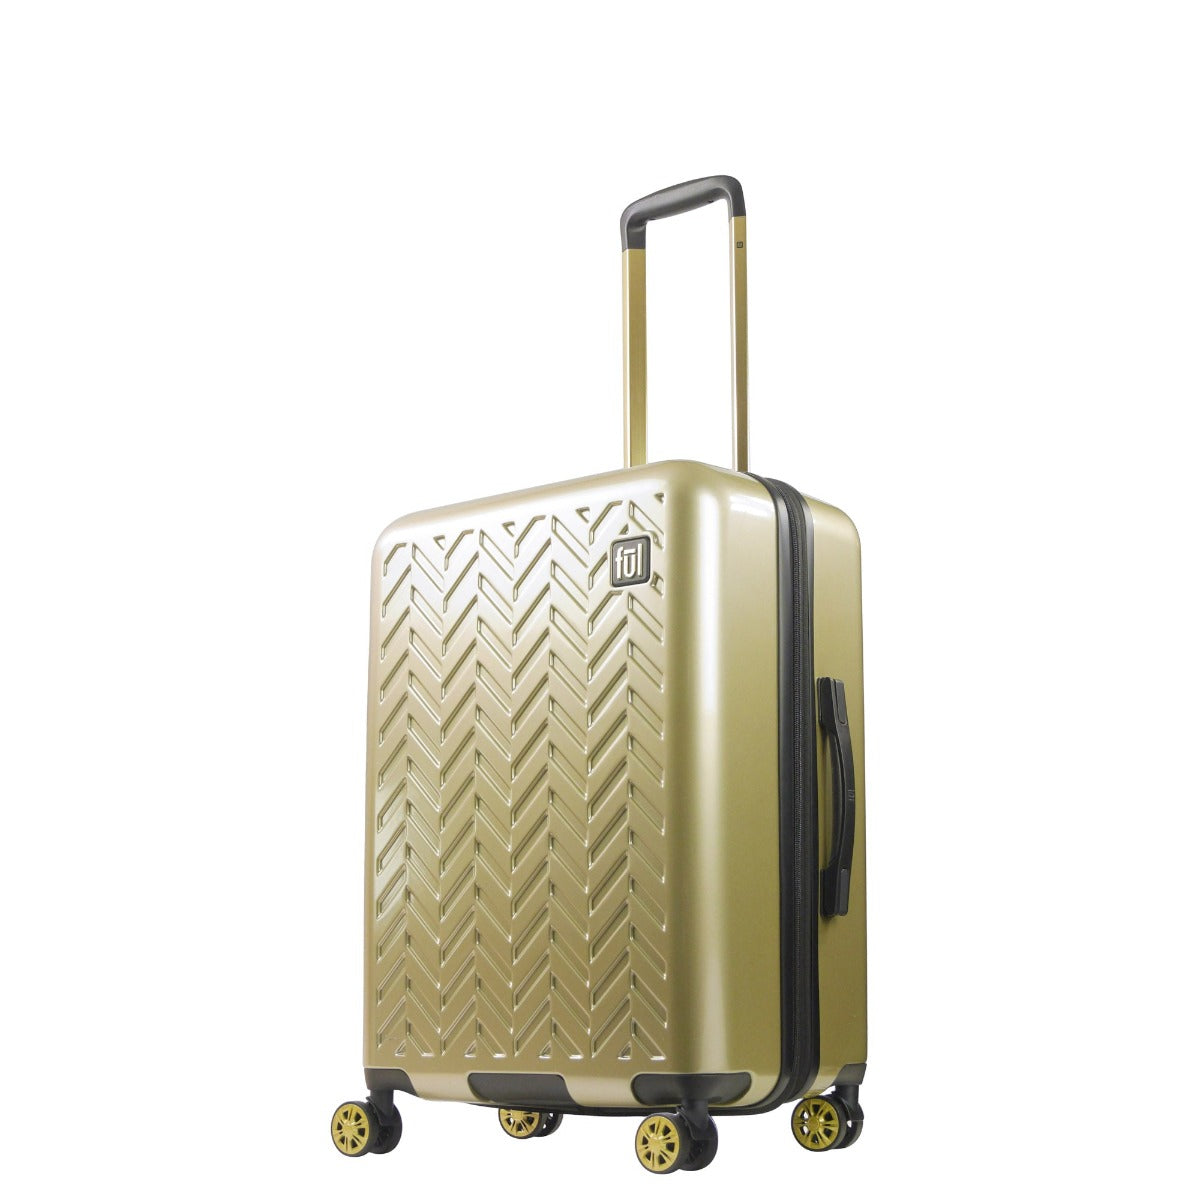 Ful Groove 27" hardside spinner suitcase checked gold luggage black details